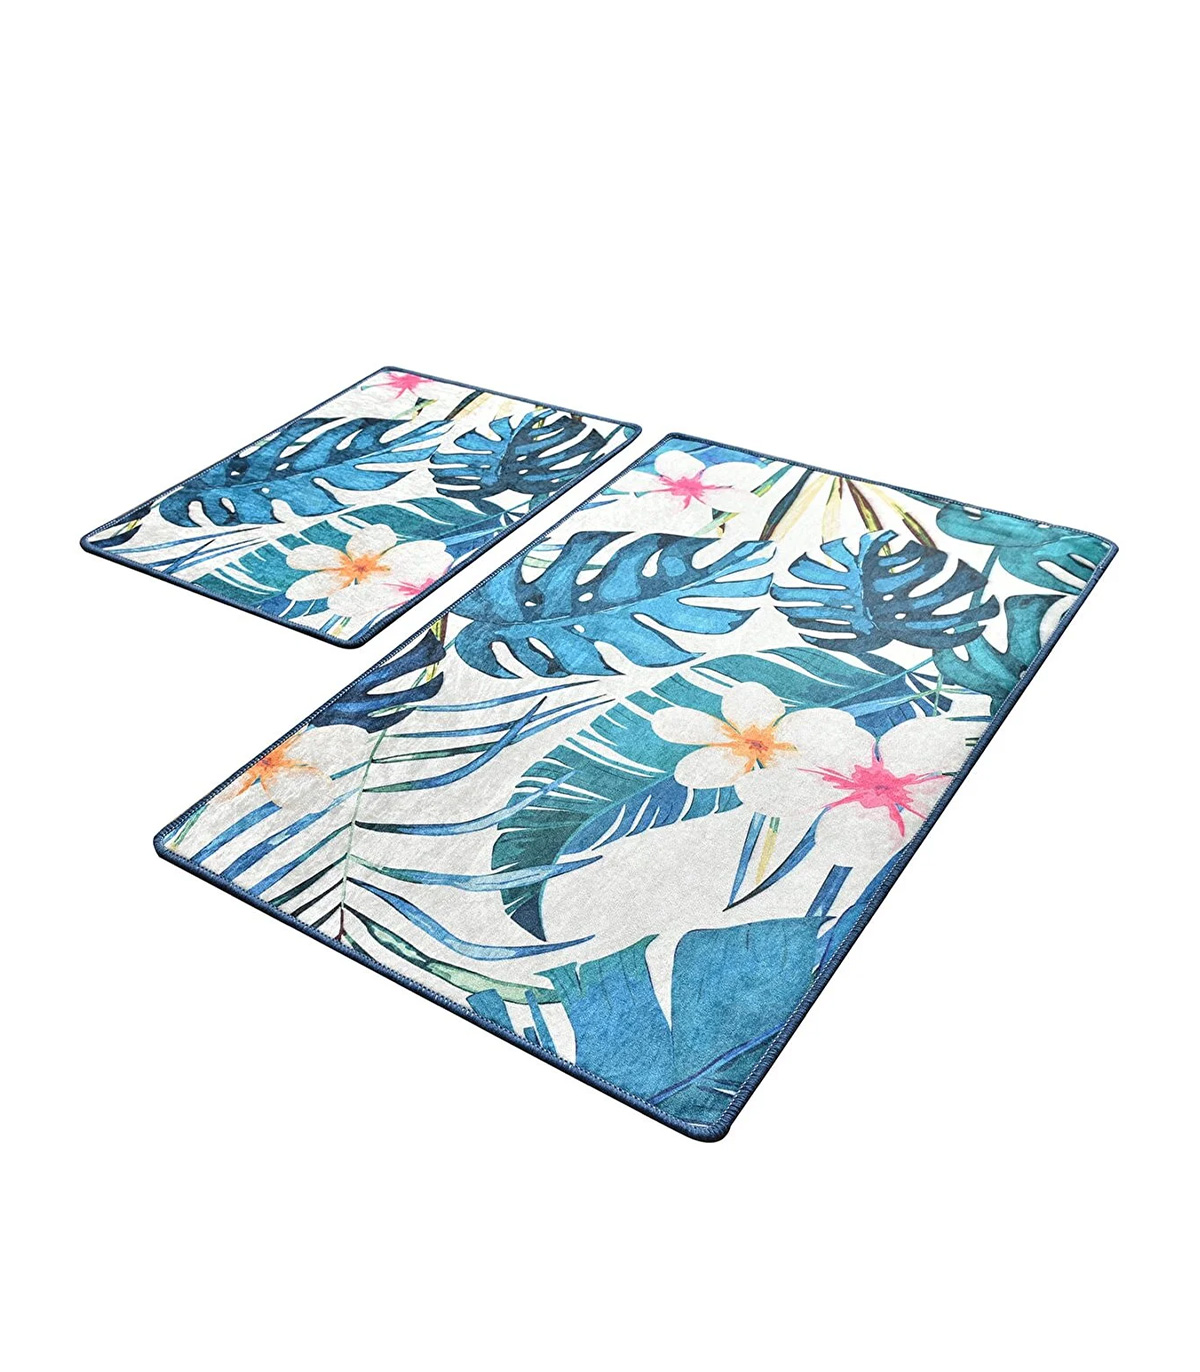 Set 2 Covorase baie Exotic Rectangular, 60 x 100 cm, 50 x 60 cm, Antiderapant, Multicolor Covoare baie